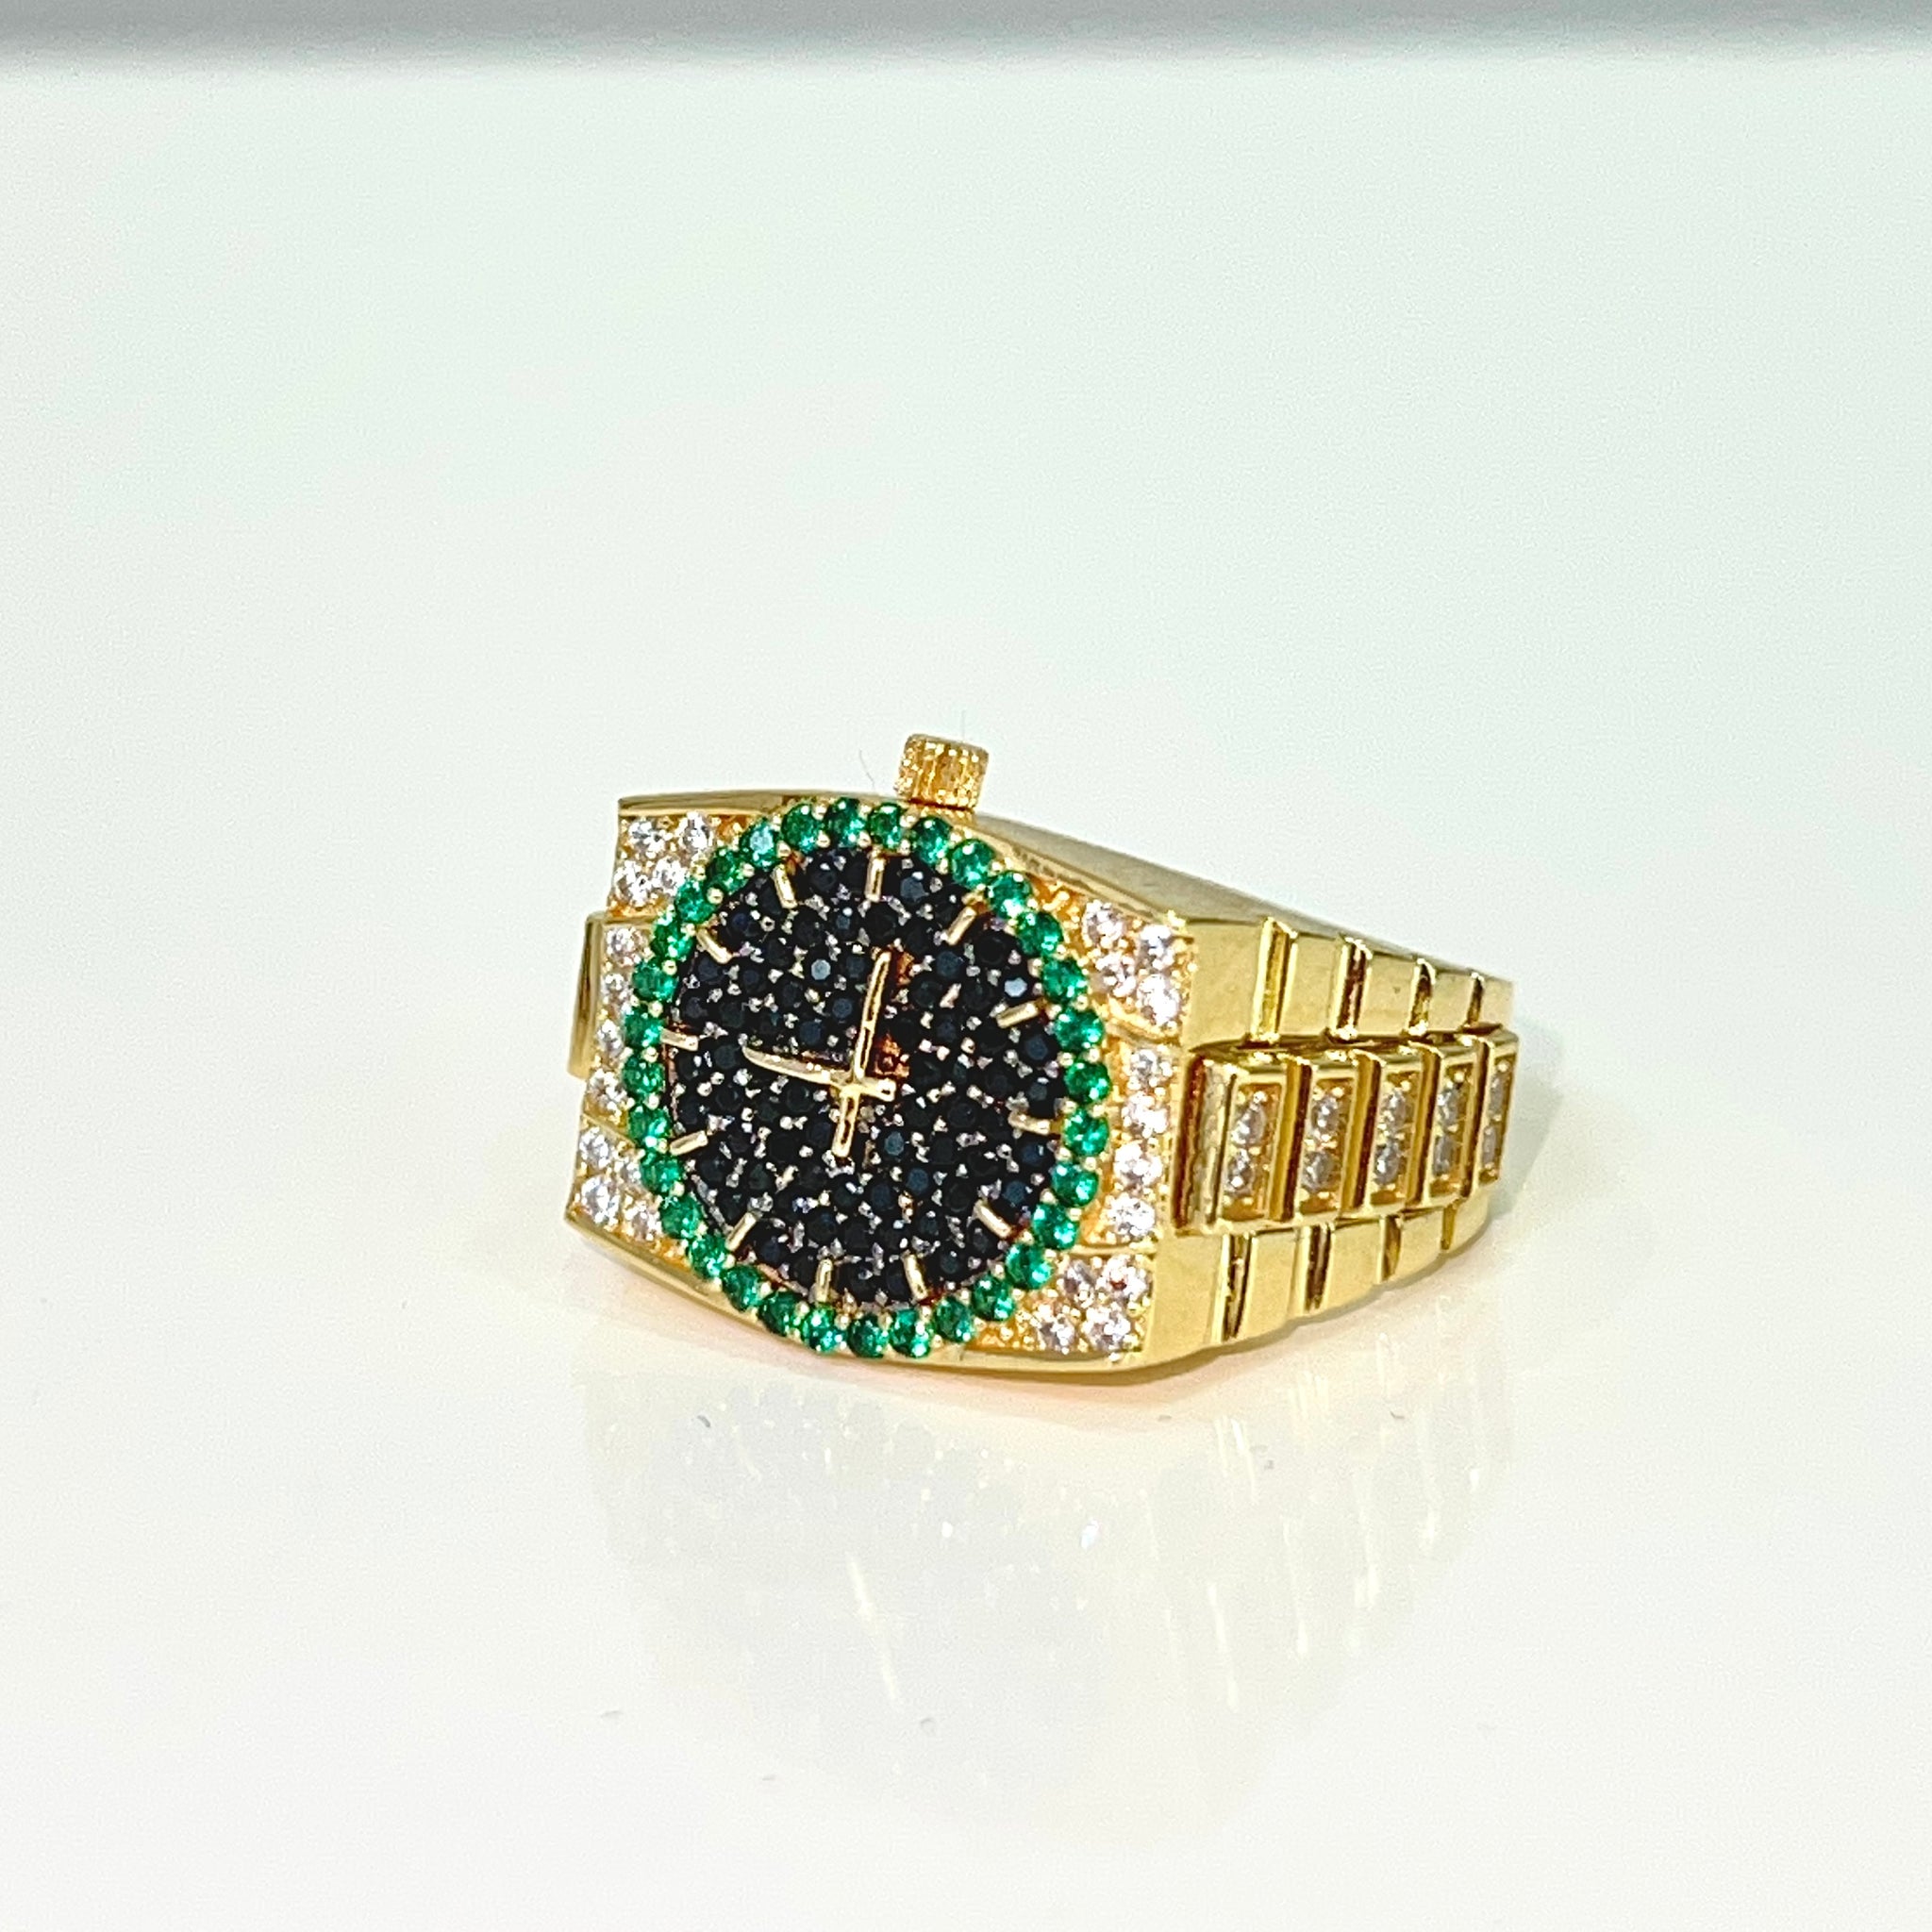 Timepiece Ring "Iced Out" - 18 carat gold